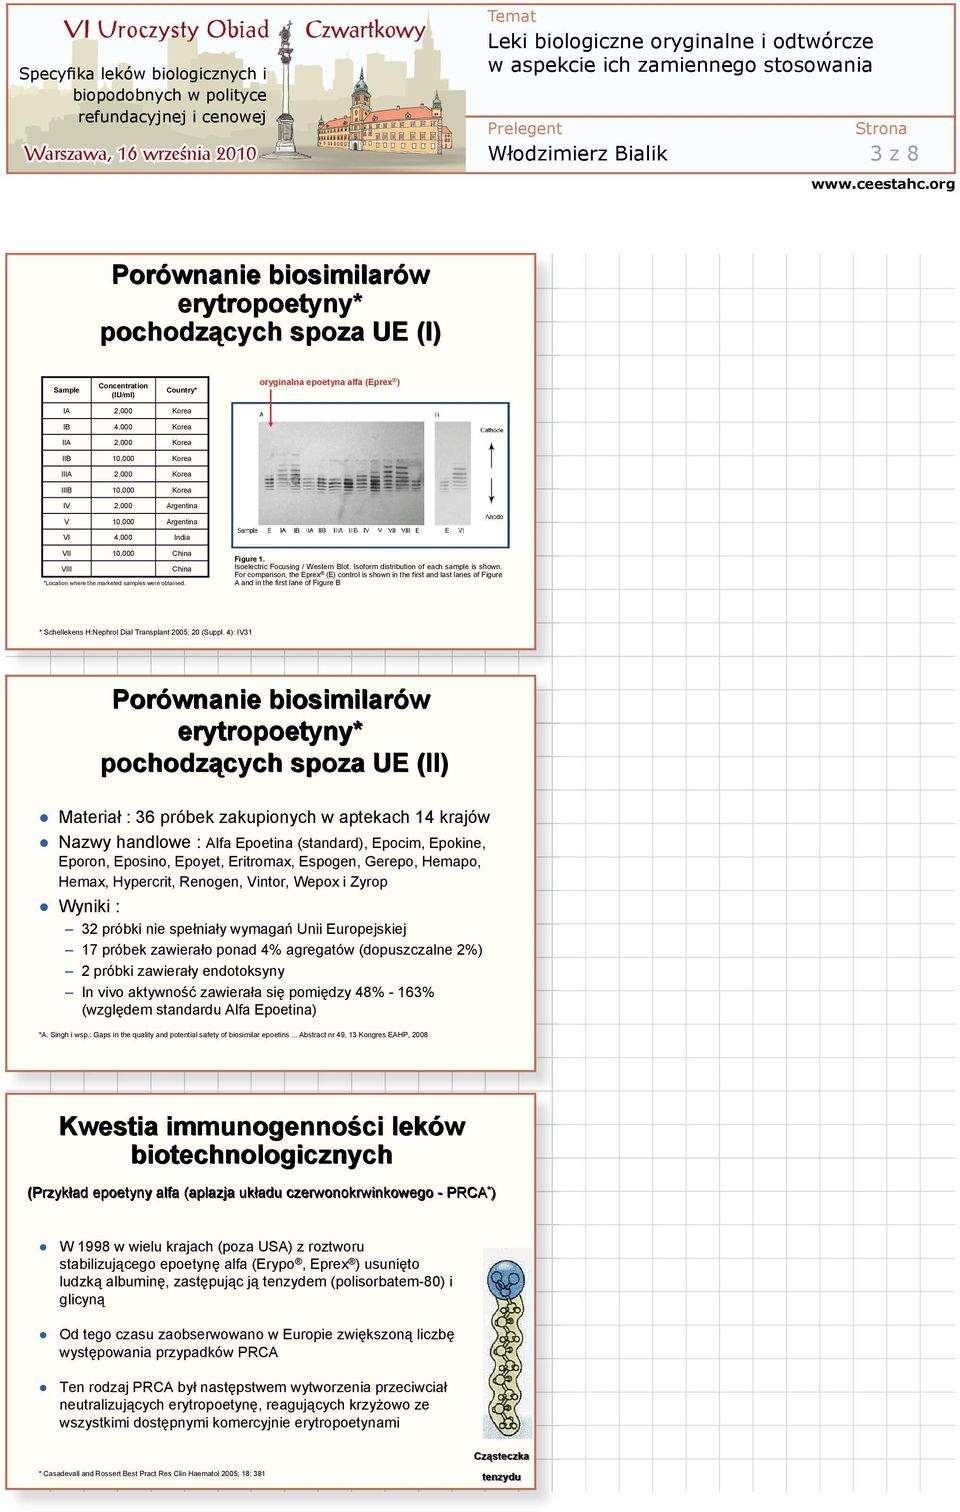 Isoelectric Focusing / Western Blot. Isoform distribution of each sample is shown.